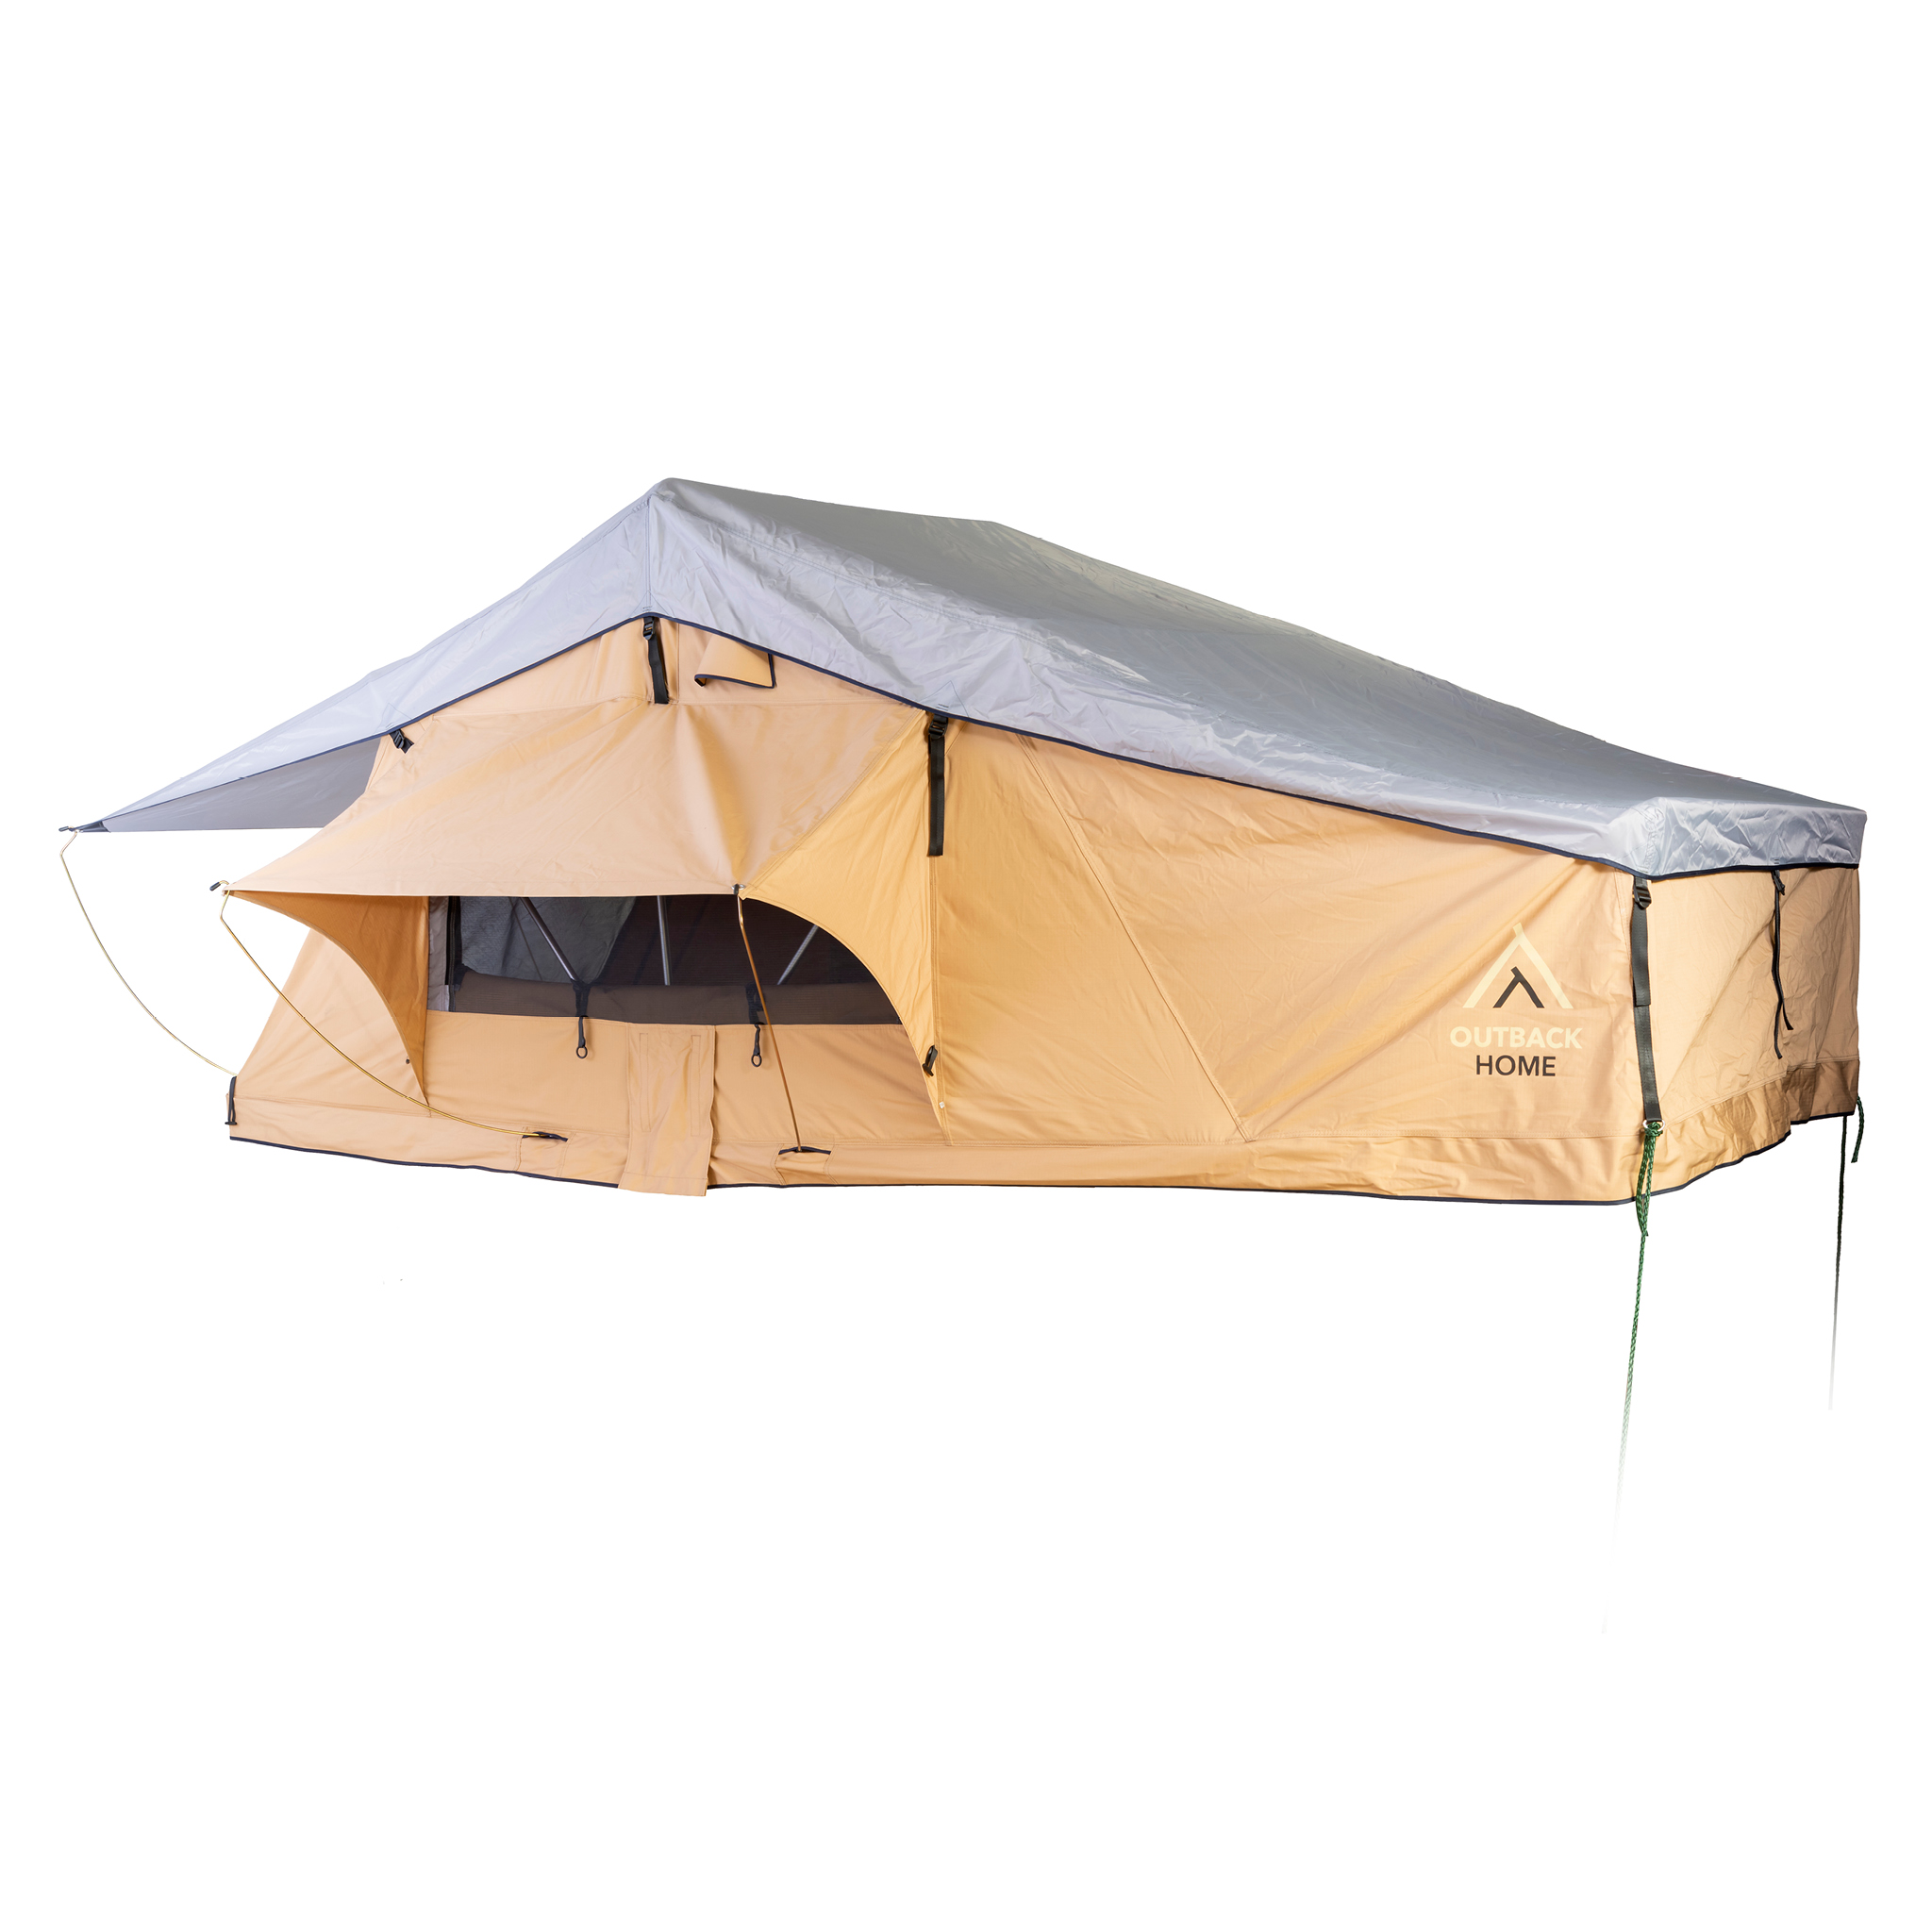 Freedom 180 Roof top Tent      180cm grey / khaki      Outback Home